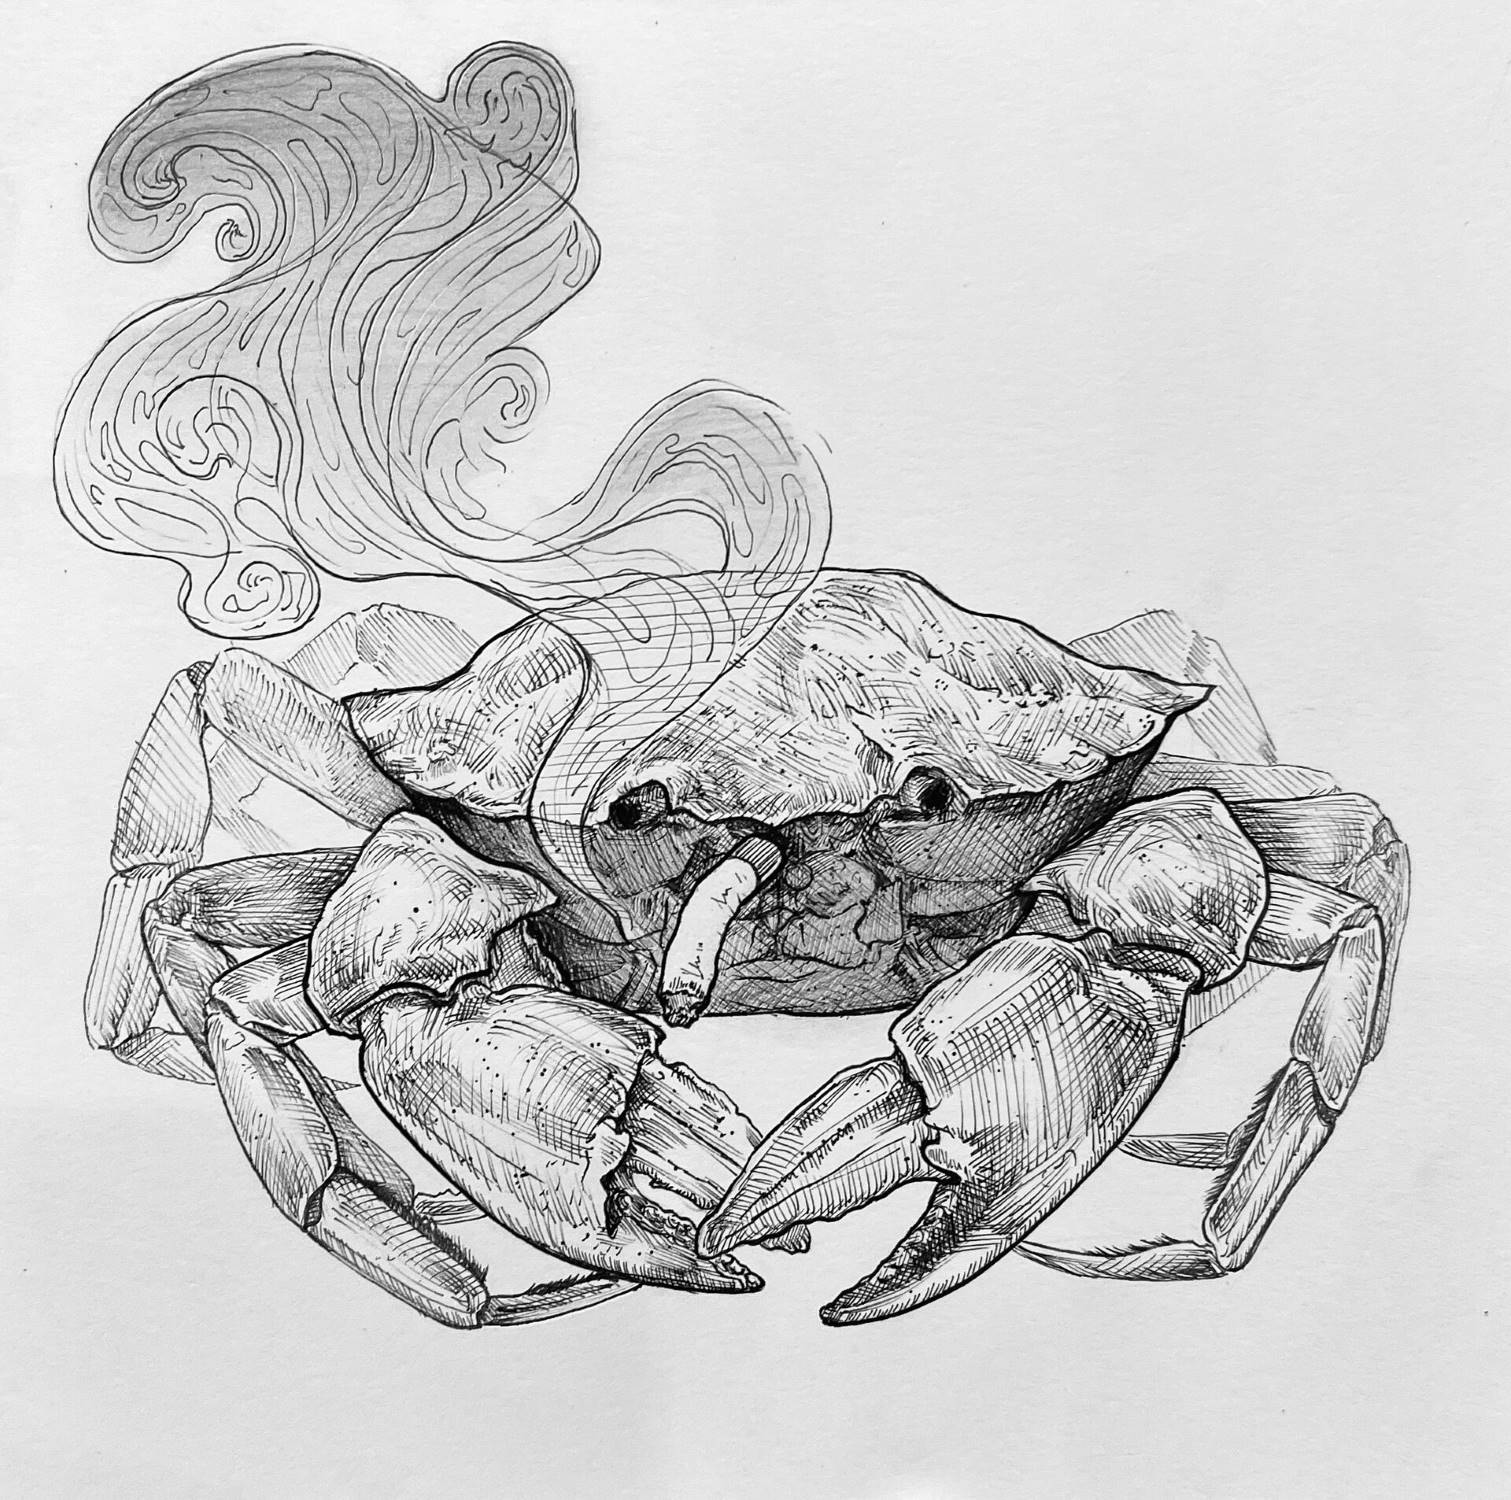 A line drawing of a crab smoking a cigarette, smoke billowing up.